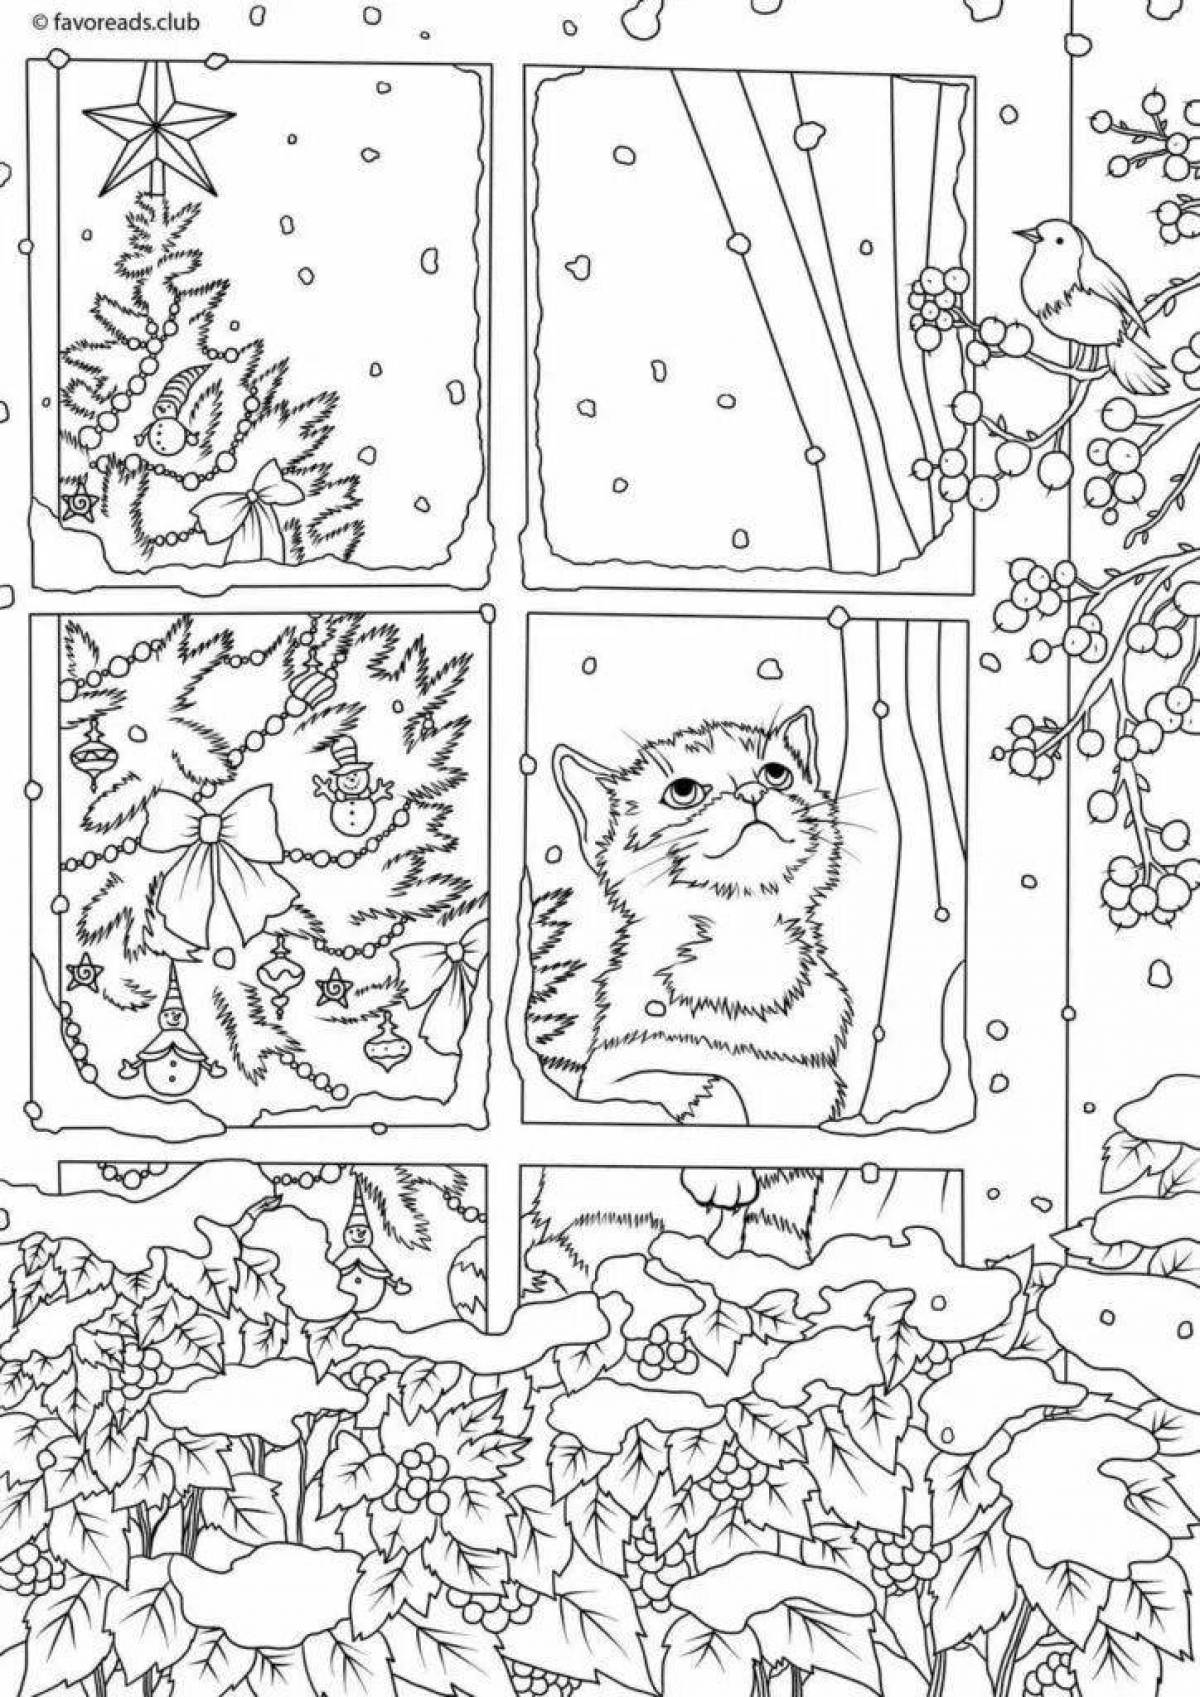 A fun Christmas coloring book for adults